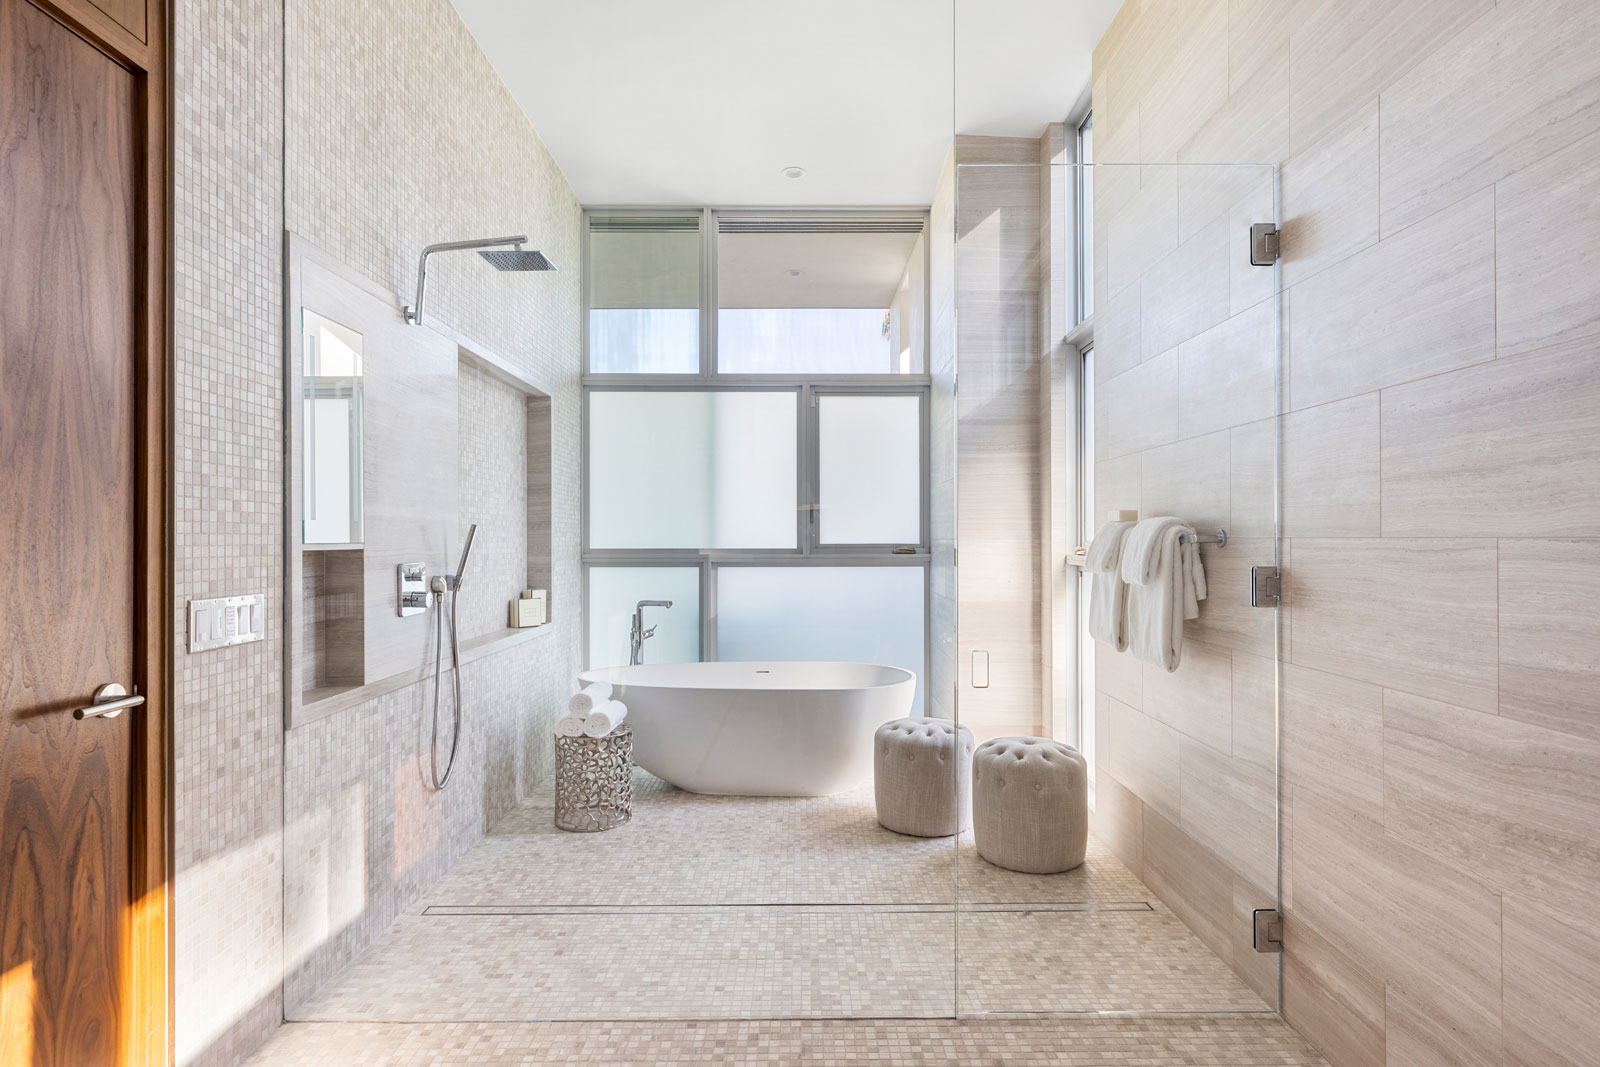 The master shower & tub. Photo: © Anthony Barcelo, Barcelo Photography